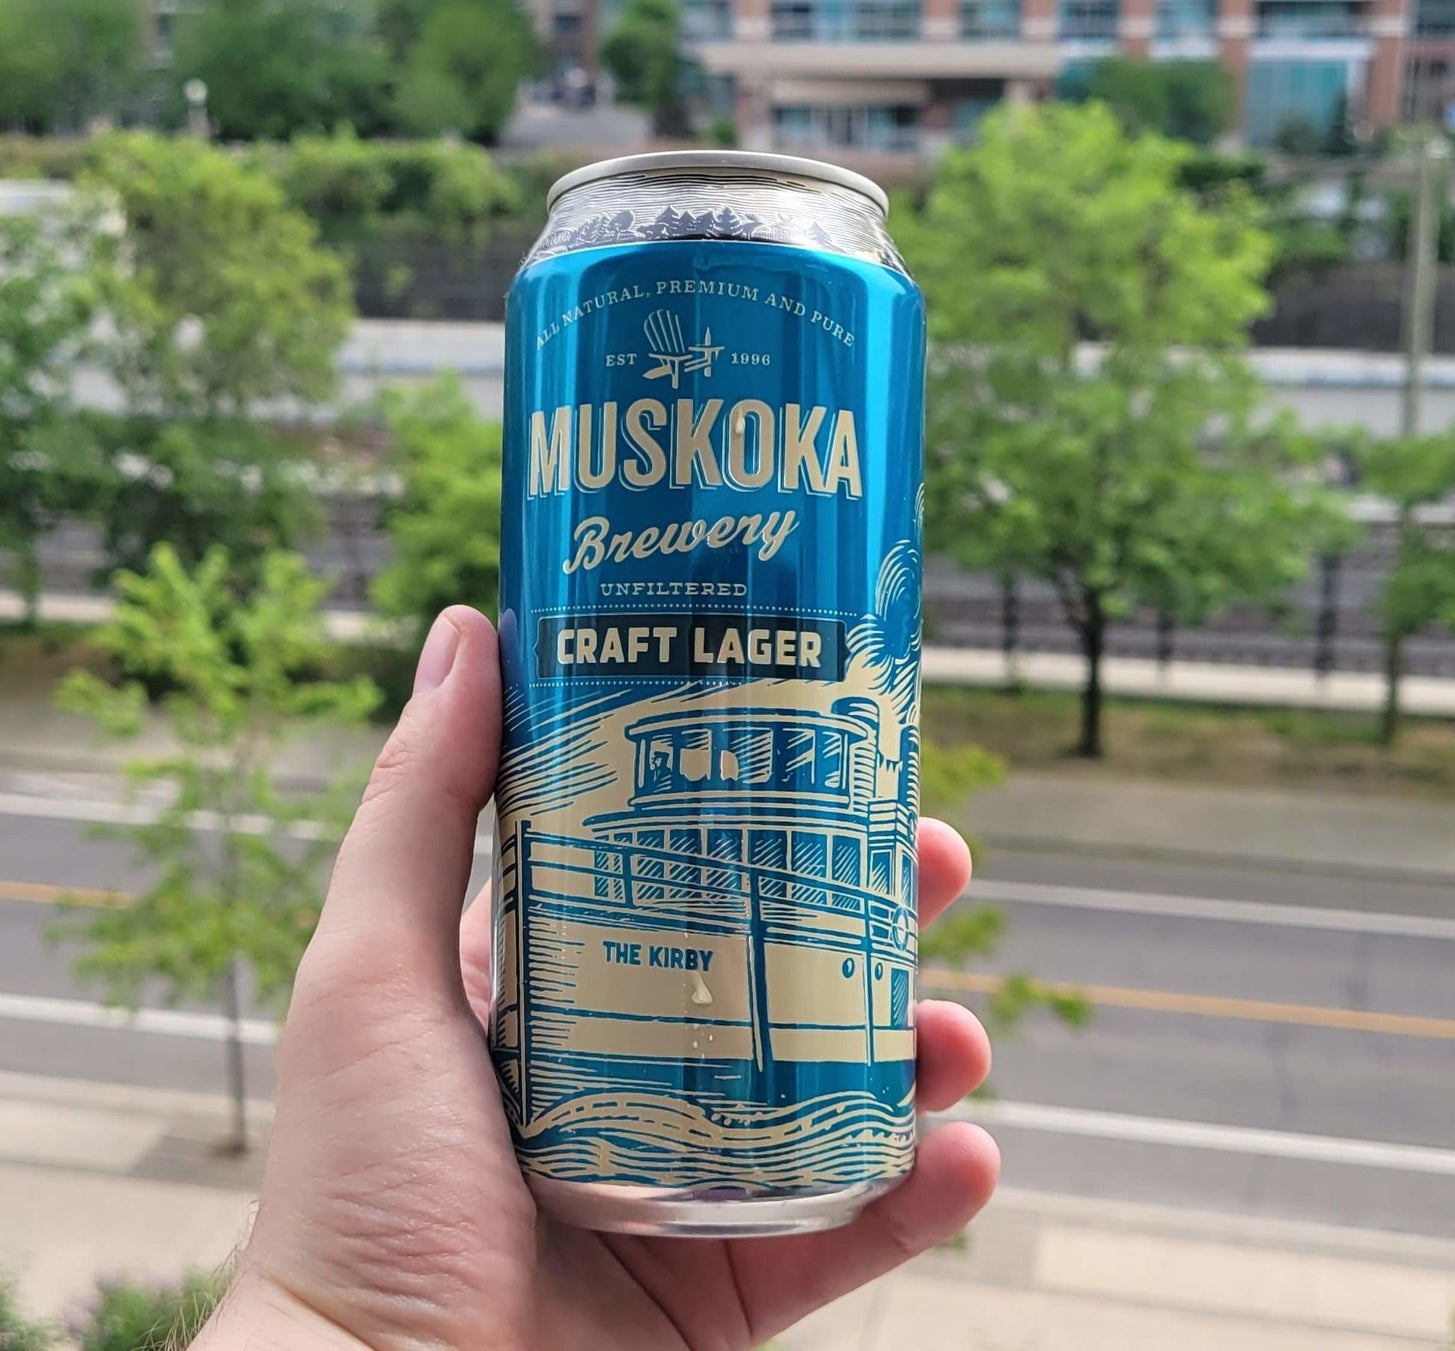 A can of Muskoka Craft Lager being held in a hand.